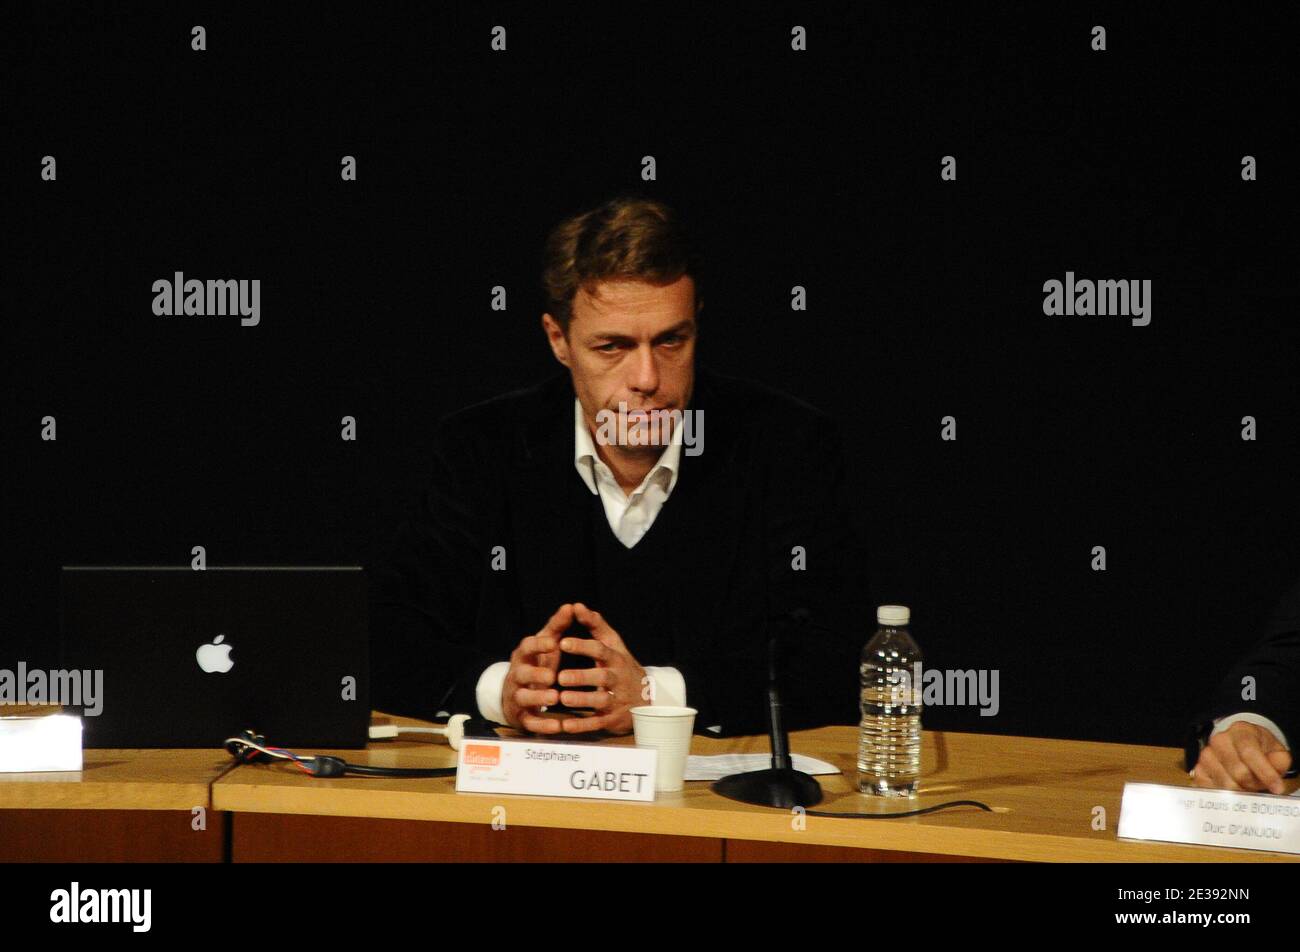 French journalist Stephane Gabet during a press conference held at Grand Palais in Paris, France on December 16, 2010 where scientists said they have identified an embalmed head as belonging to King Henri IV of France, who was assassinated in 1610 at the age of 57. The head was lost after revolutionaries ransacked the royal chapel at Saint Denis, near Paris, in 1793. A head, presumed to be that of Henri IV, has passed between private collectors since then. Photo by Nicolas Briquet/ABACAPRESS.COM Stock Photo